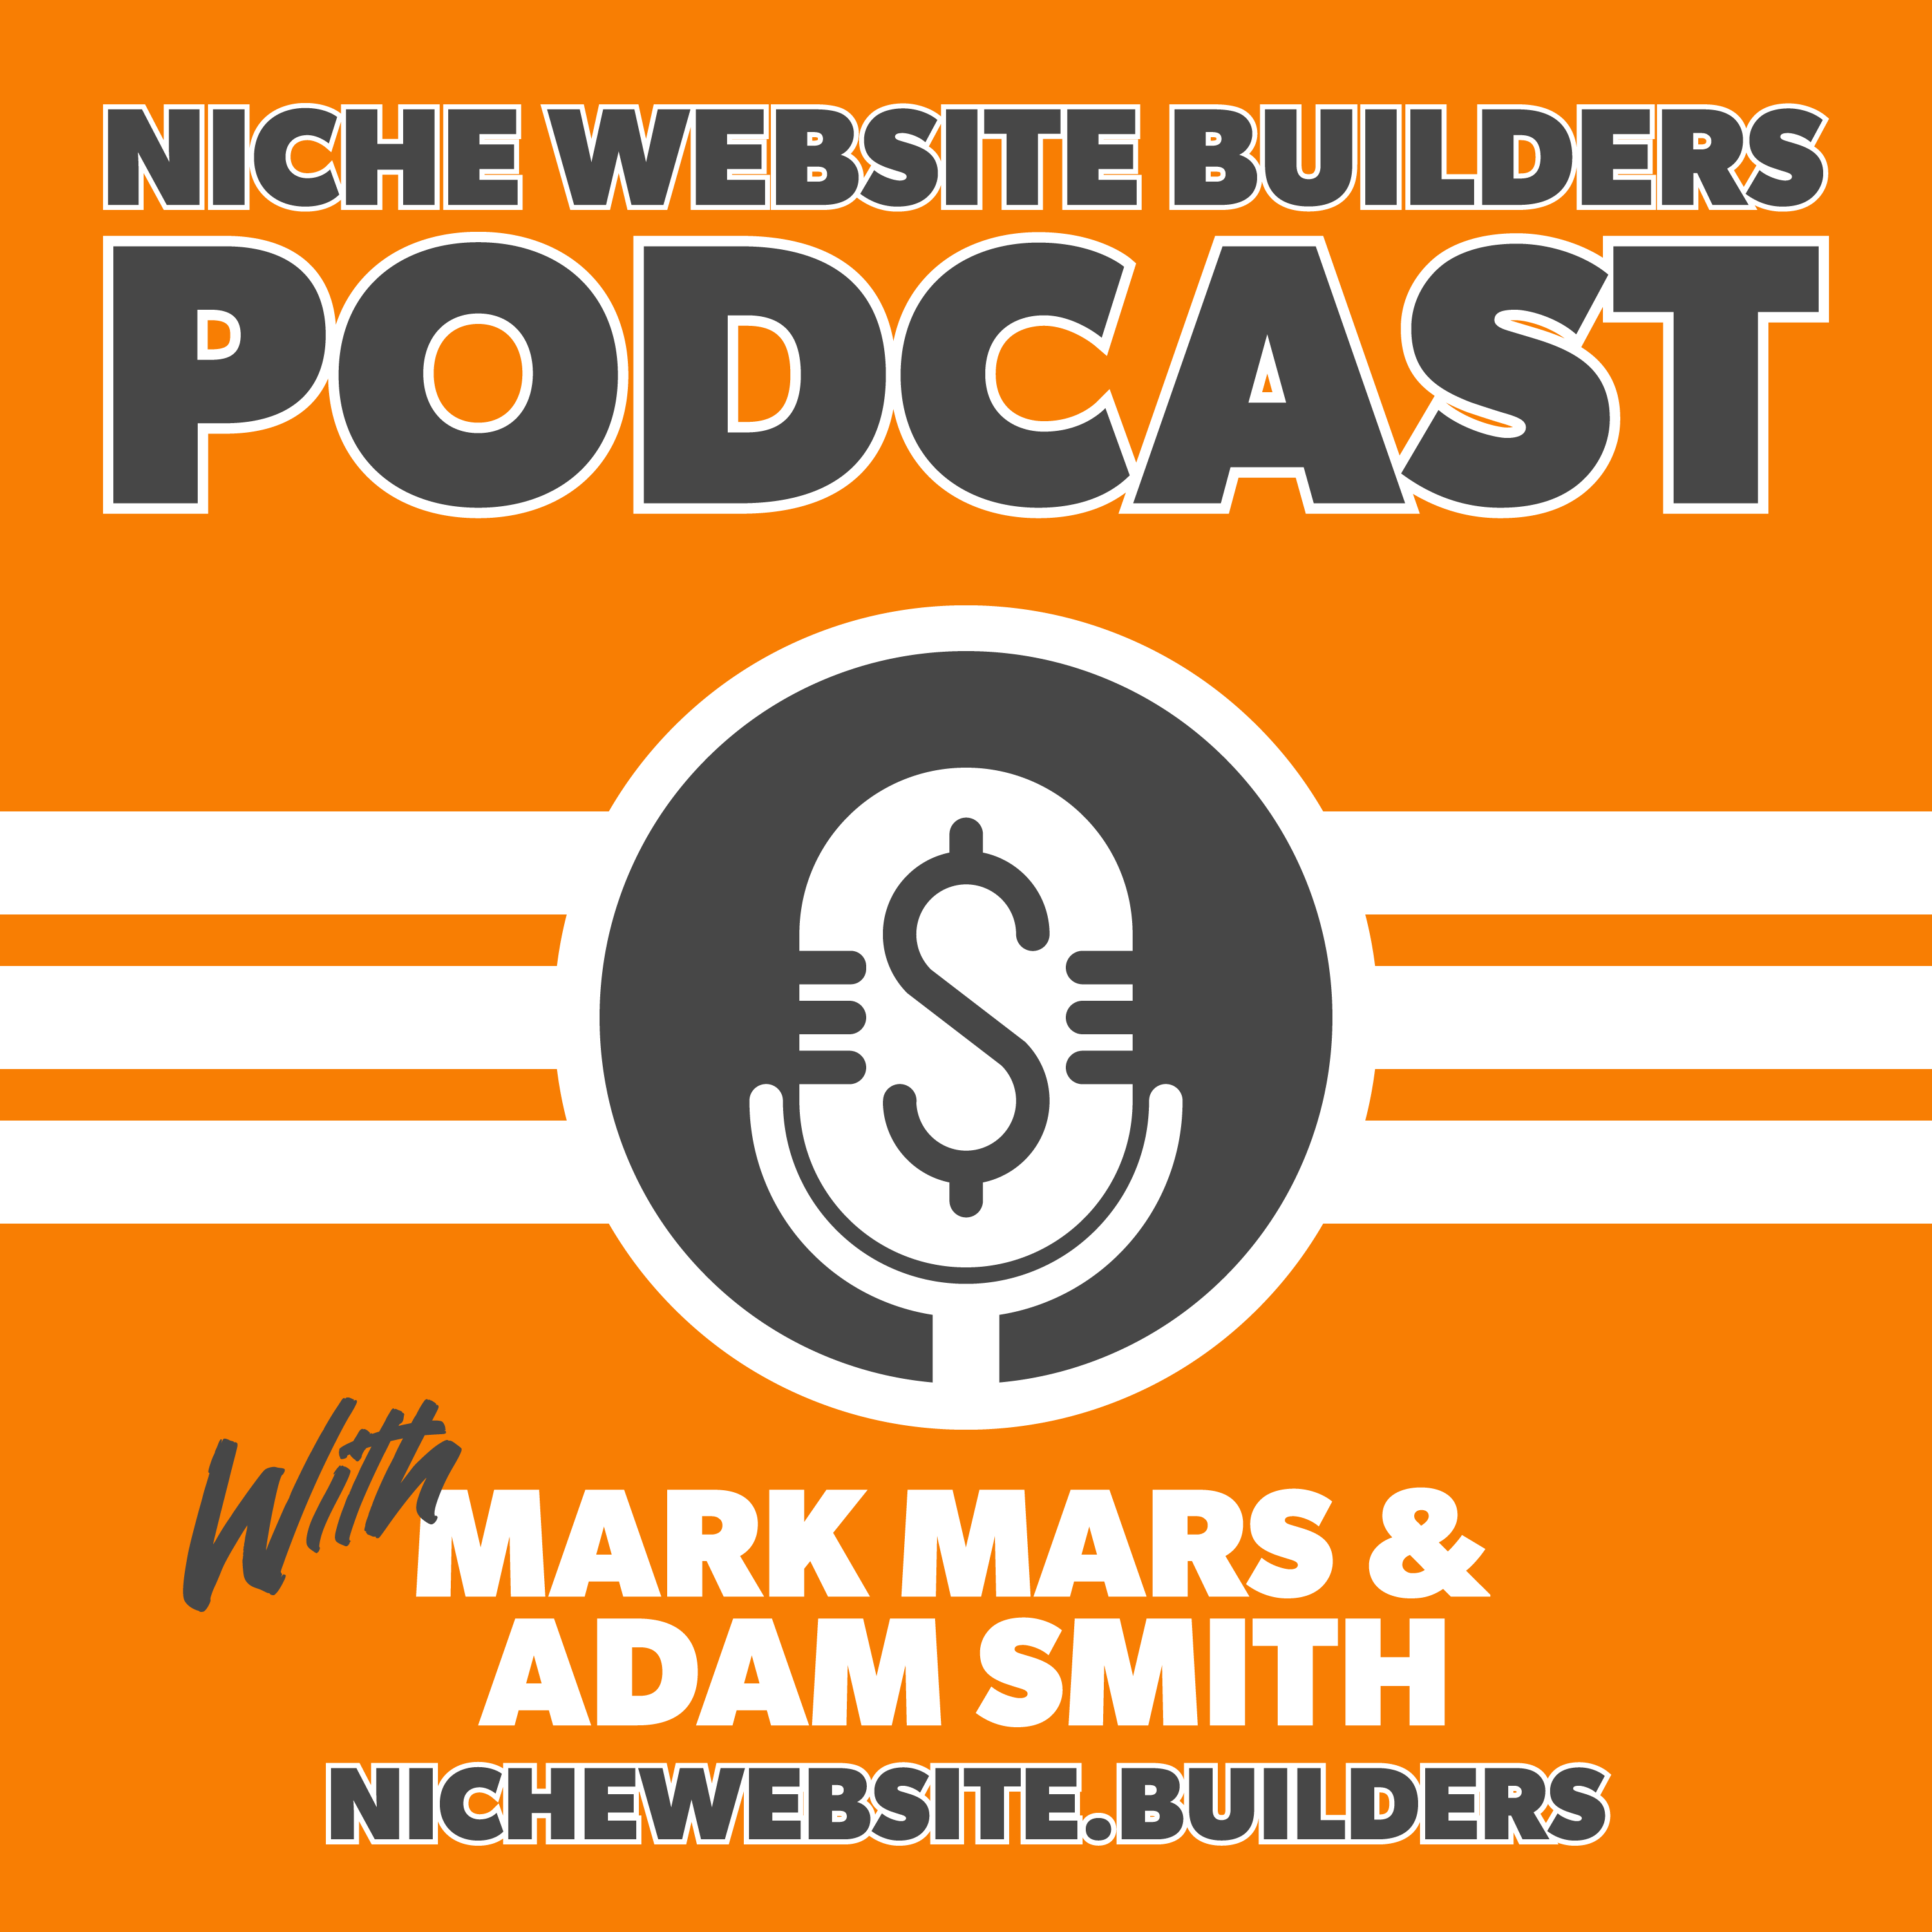 Nick Eubanks on memberships, keyword spread, and building authorship for affiliate sites